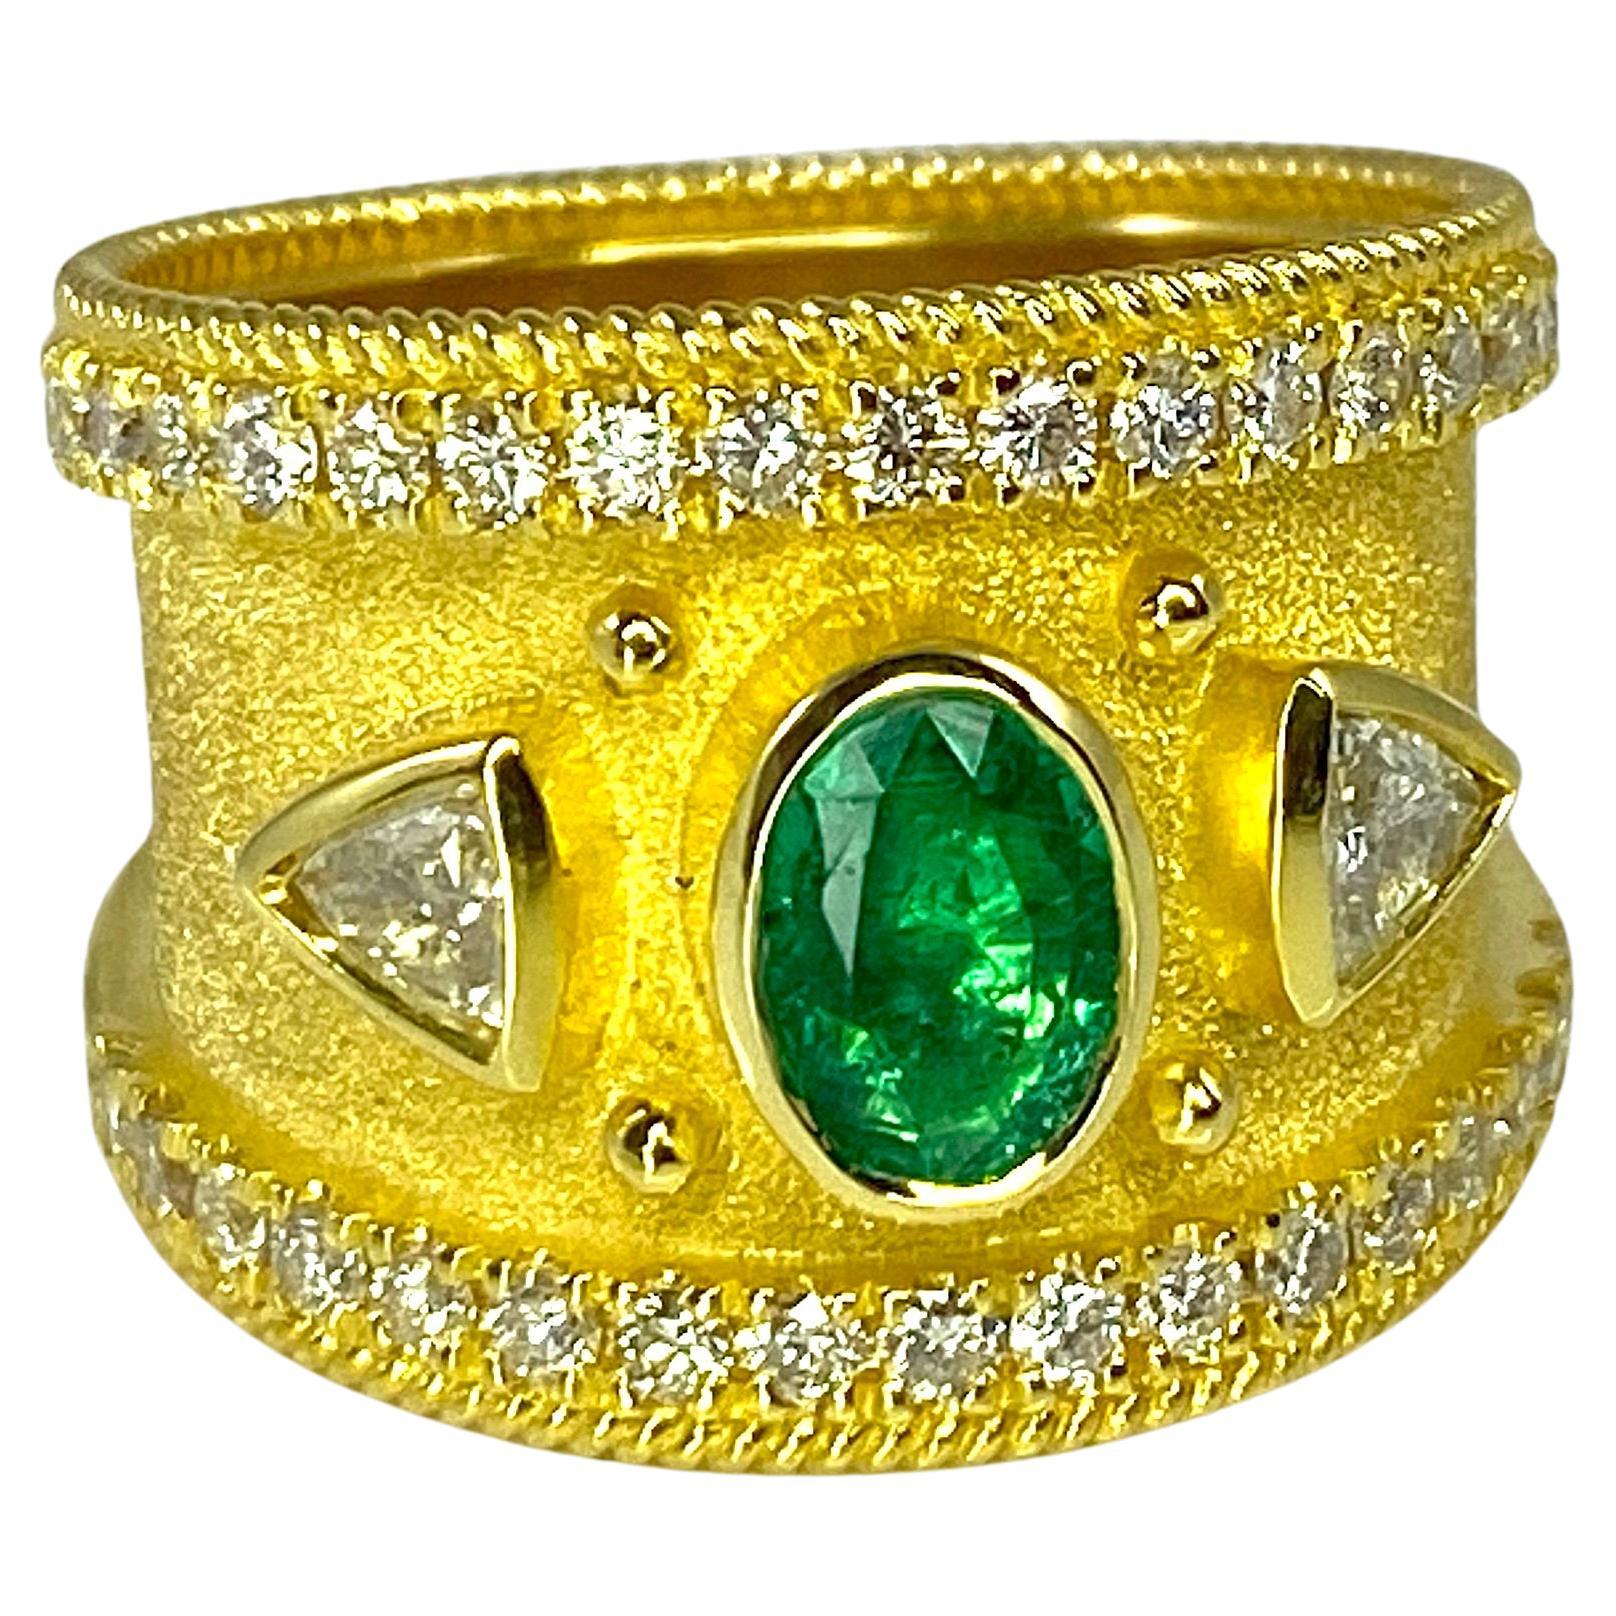 This is a stunning S.Georgios designer Ring in Yellow Gold 18 Karat all decorated with a Byzantine velvet background and granulation details - twisted wires and beads. The center of the ring features a beautiful 0.68 Carat oval cut Emerald